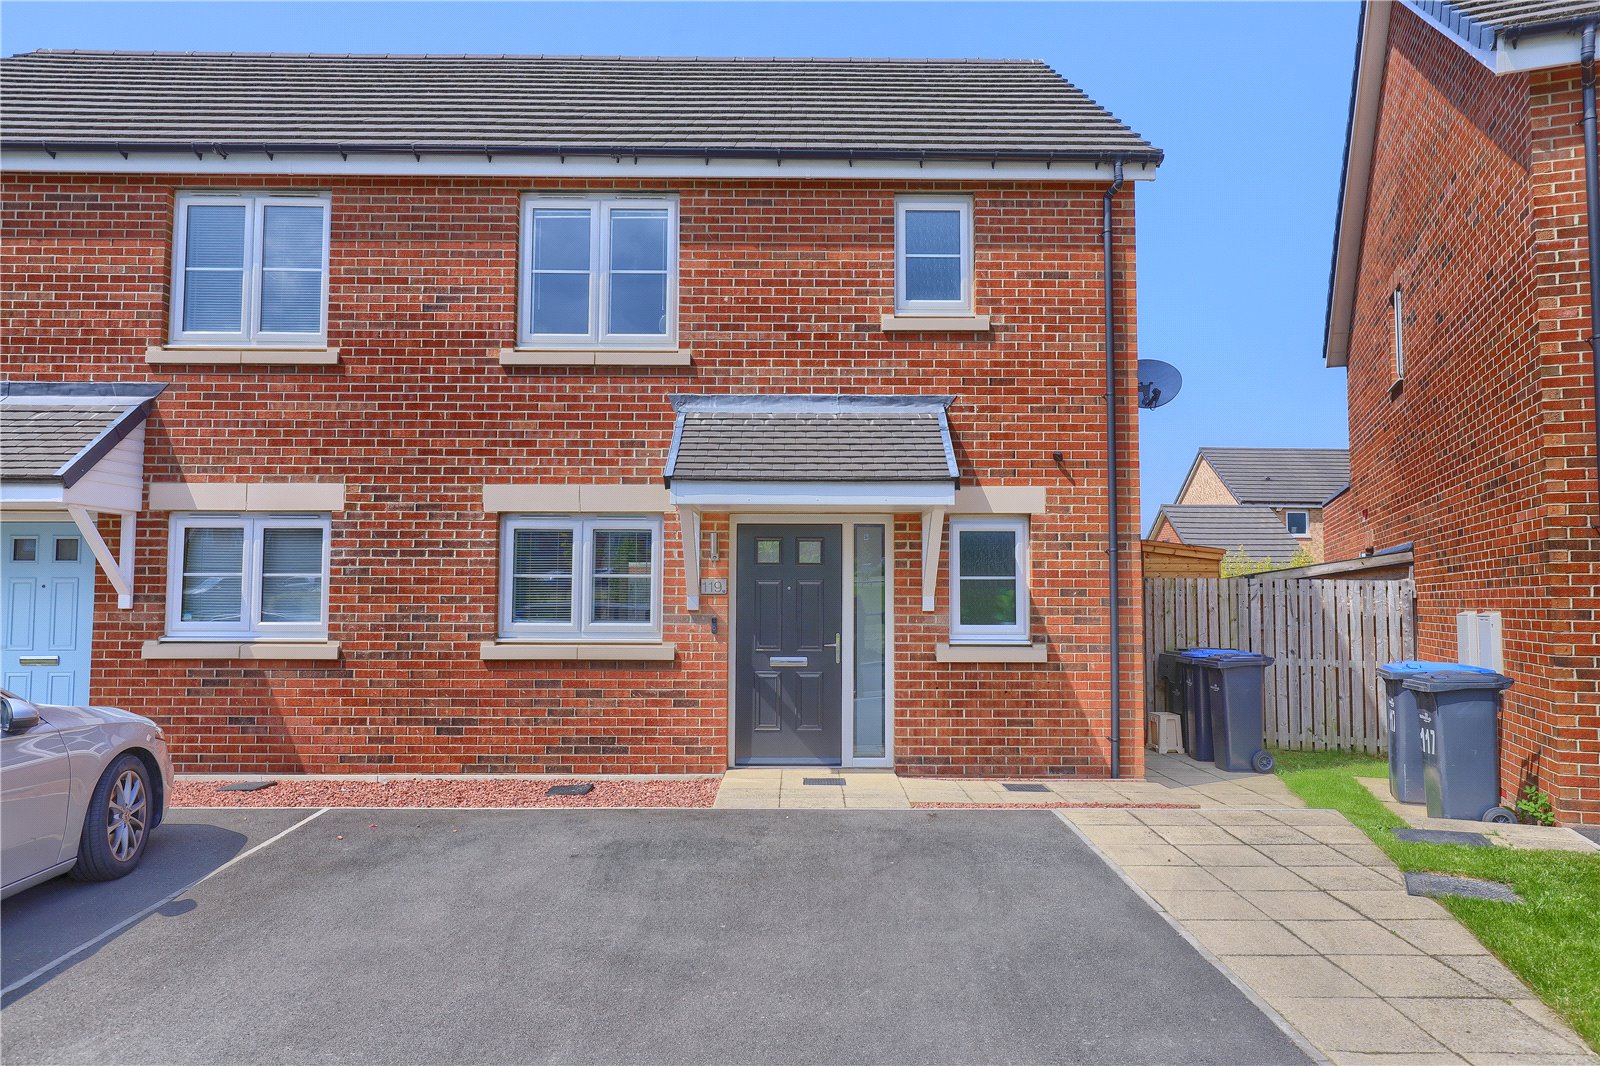 3 bed house for sale in Low Gill View, Middlesbrough 1